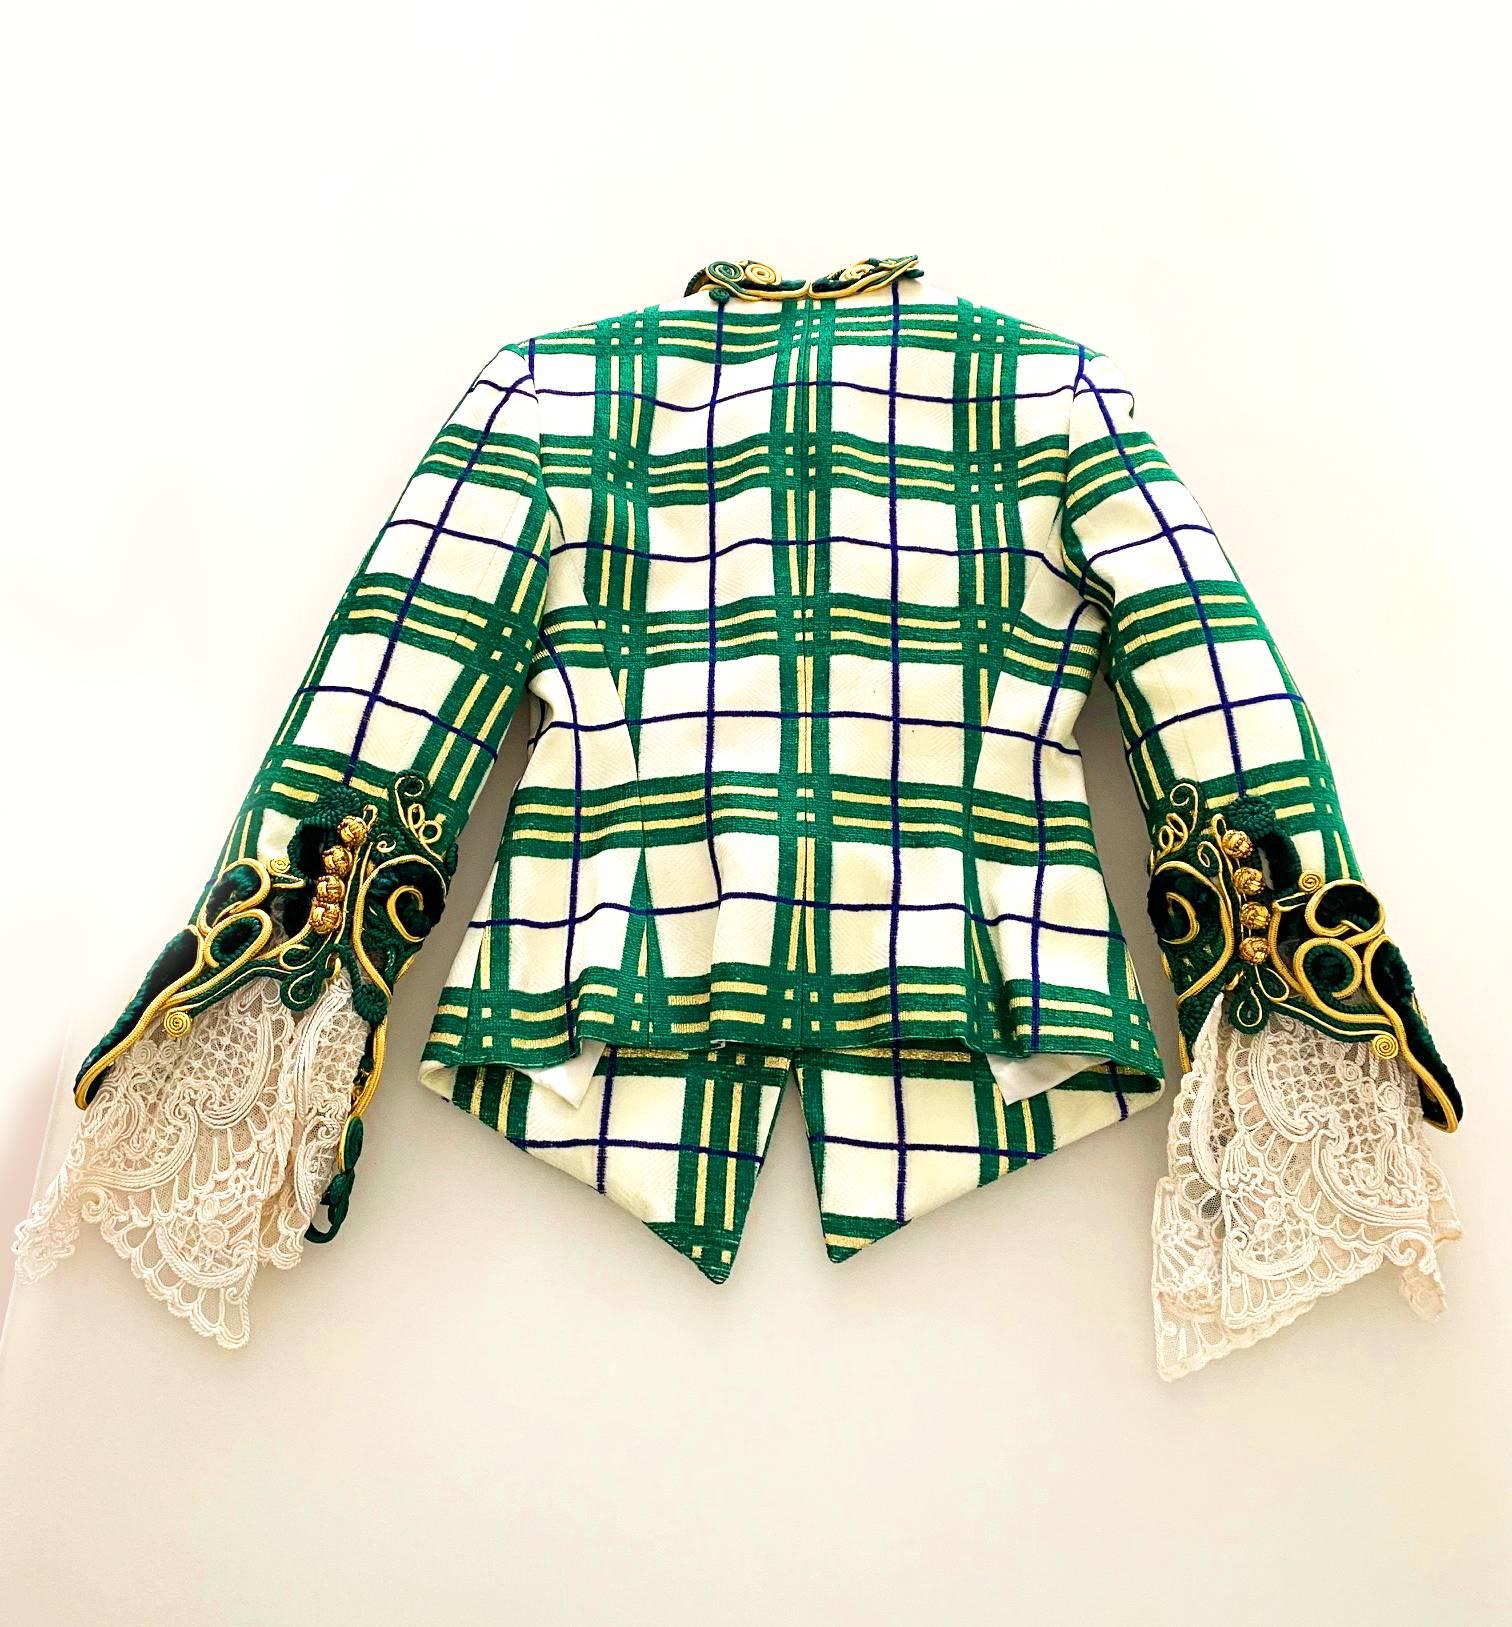 This spectacular blazer from 2000s Dior features a green tartar and gold strip print on white background on dark blue stripes, Rococo style sleeves, gold cord detailing combined with green velvet embellish over the cuffs, front button closure,